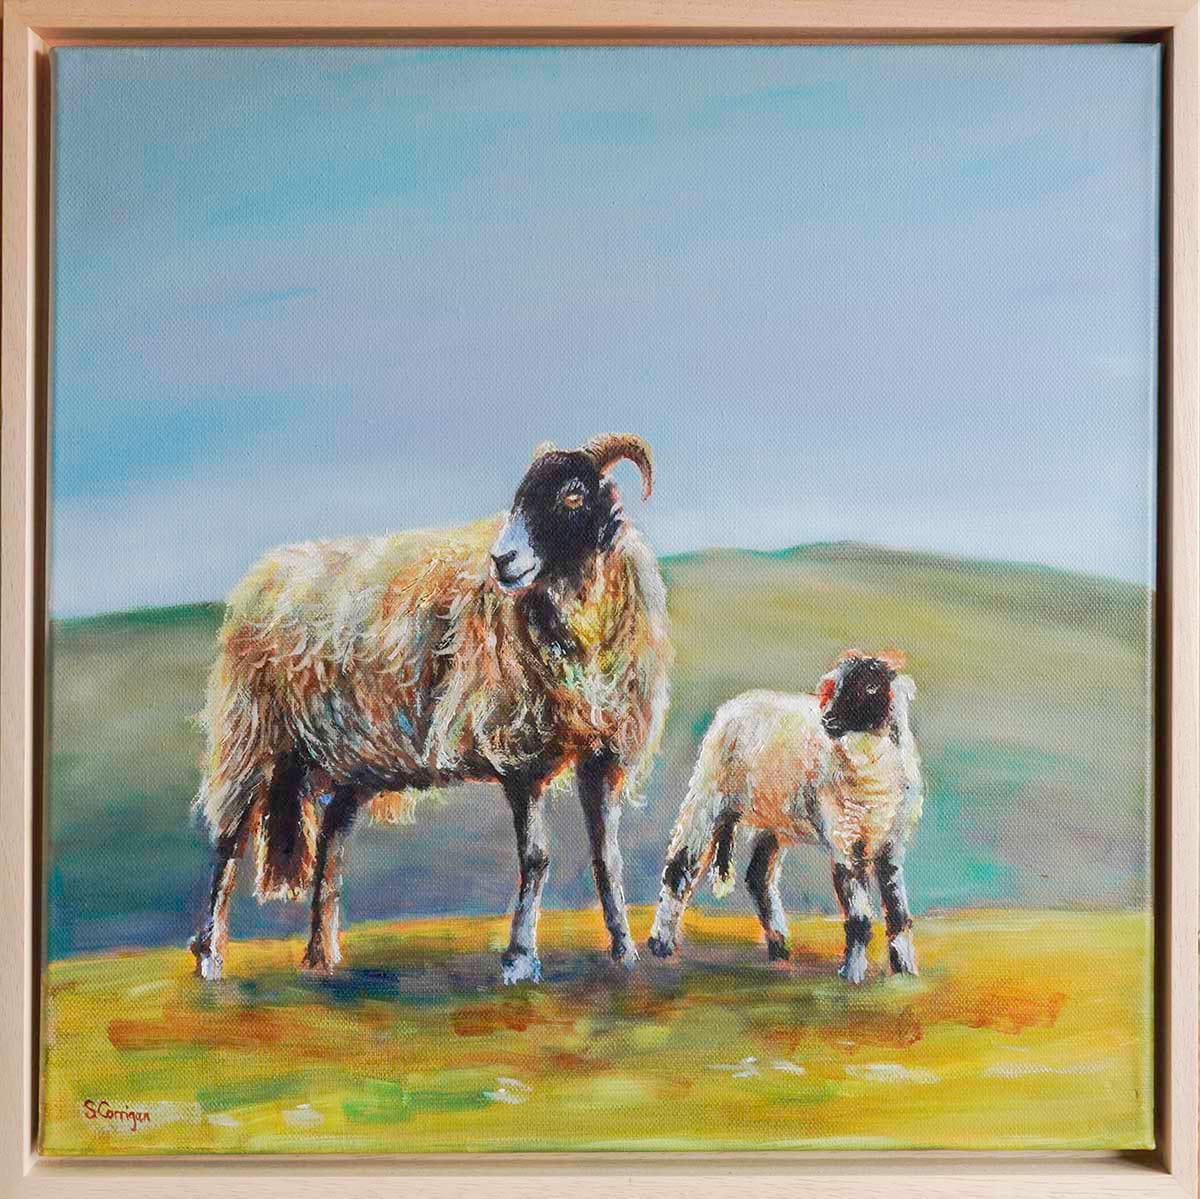 Mother and child by Sarah Corrigan  Image: framed oil painting